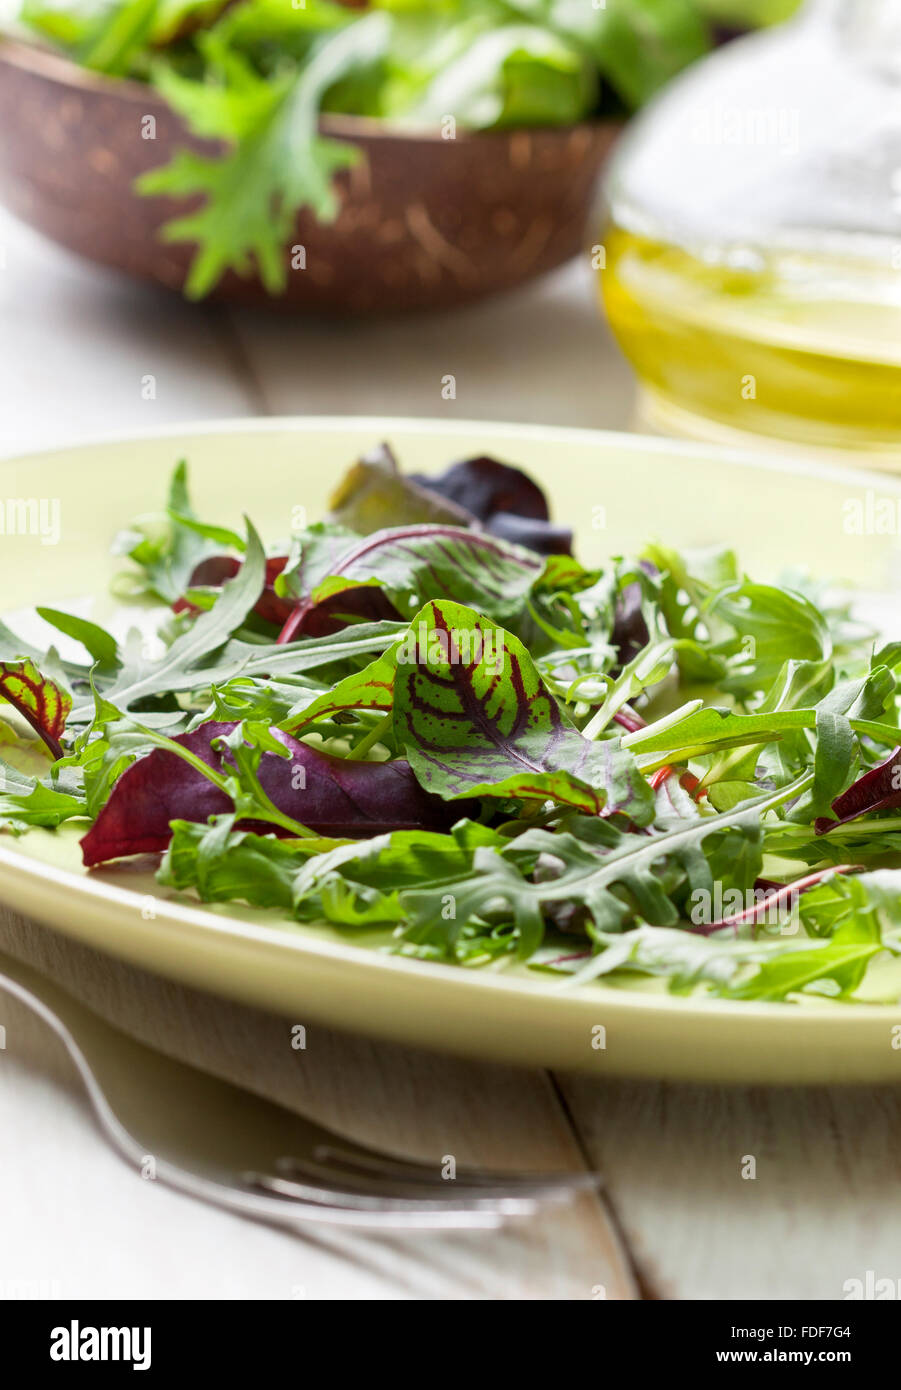 mixture of salad leaves on a plate, olive oil on a wooden background Stock Photo